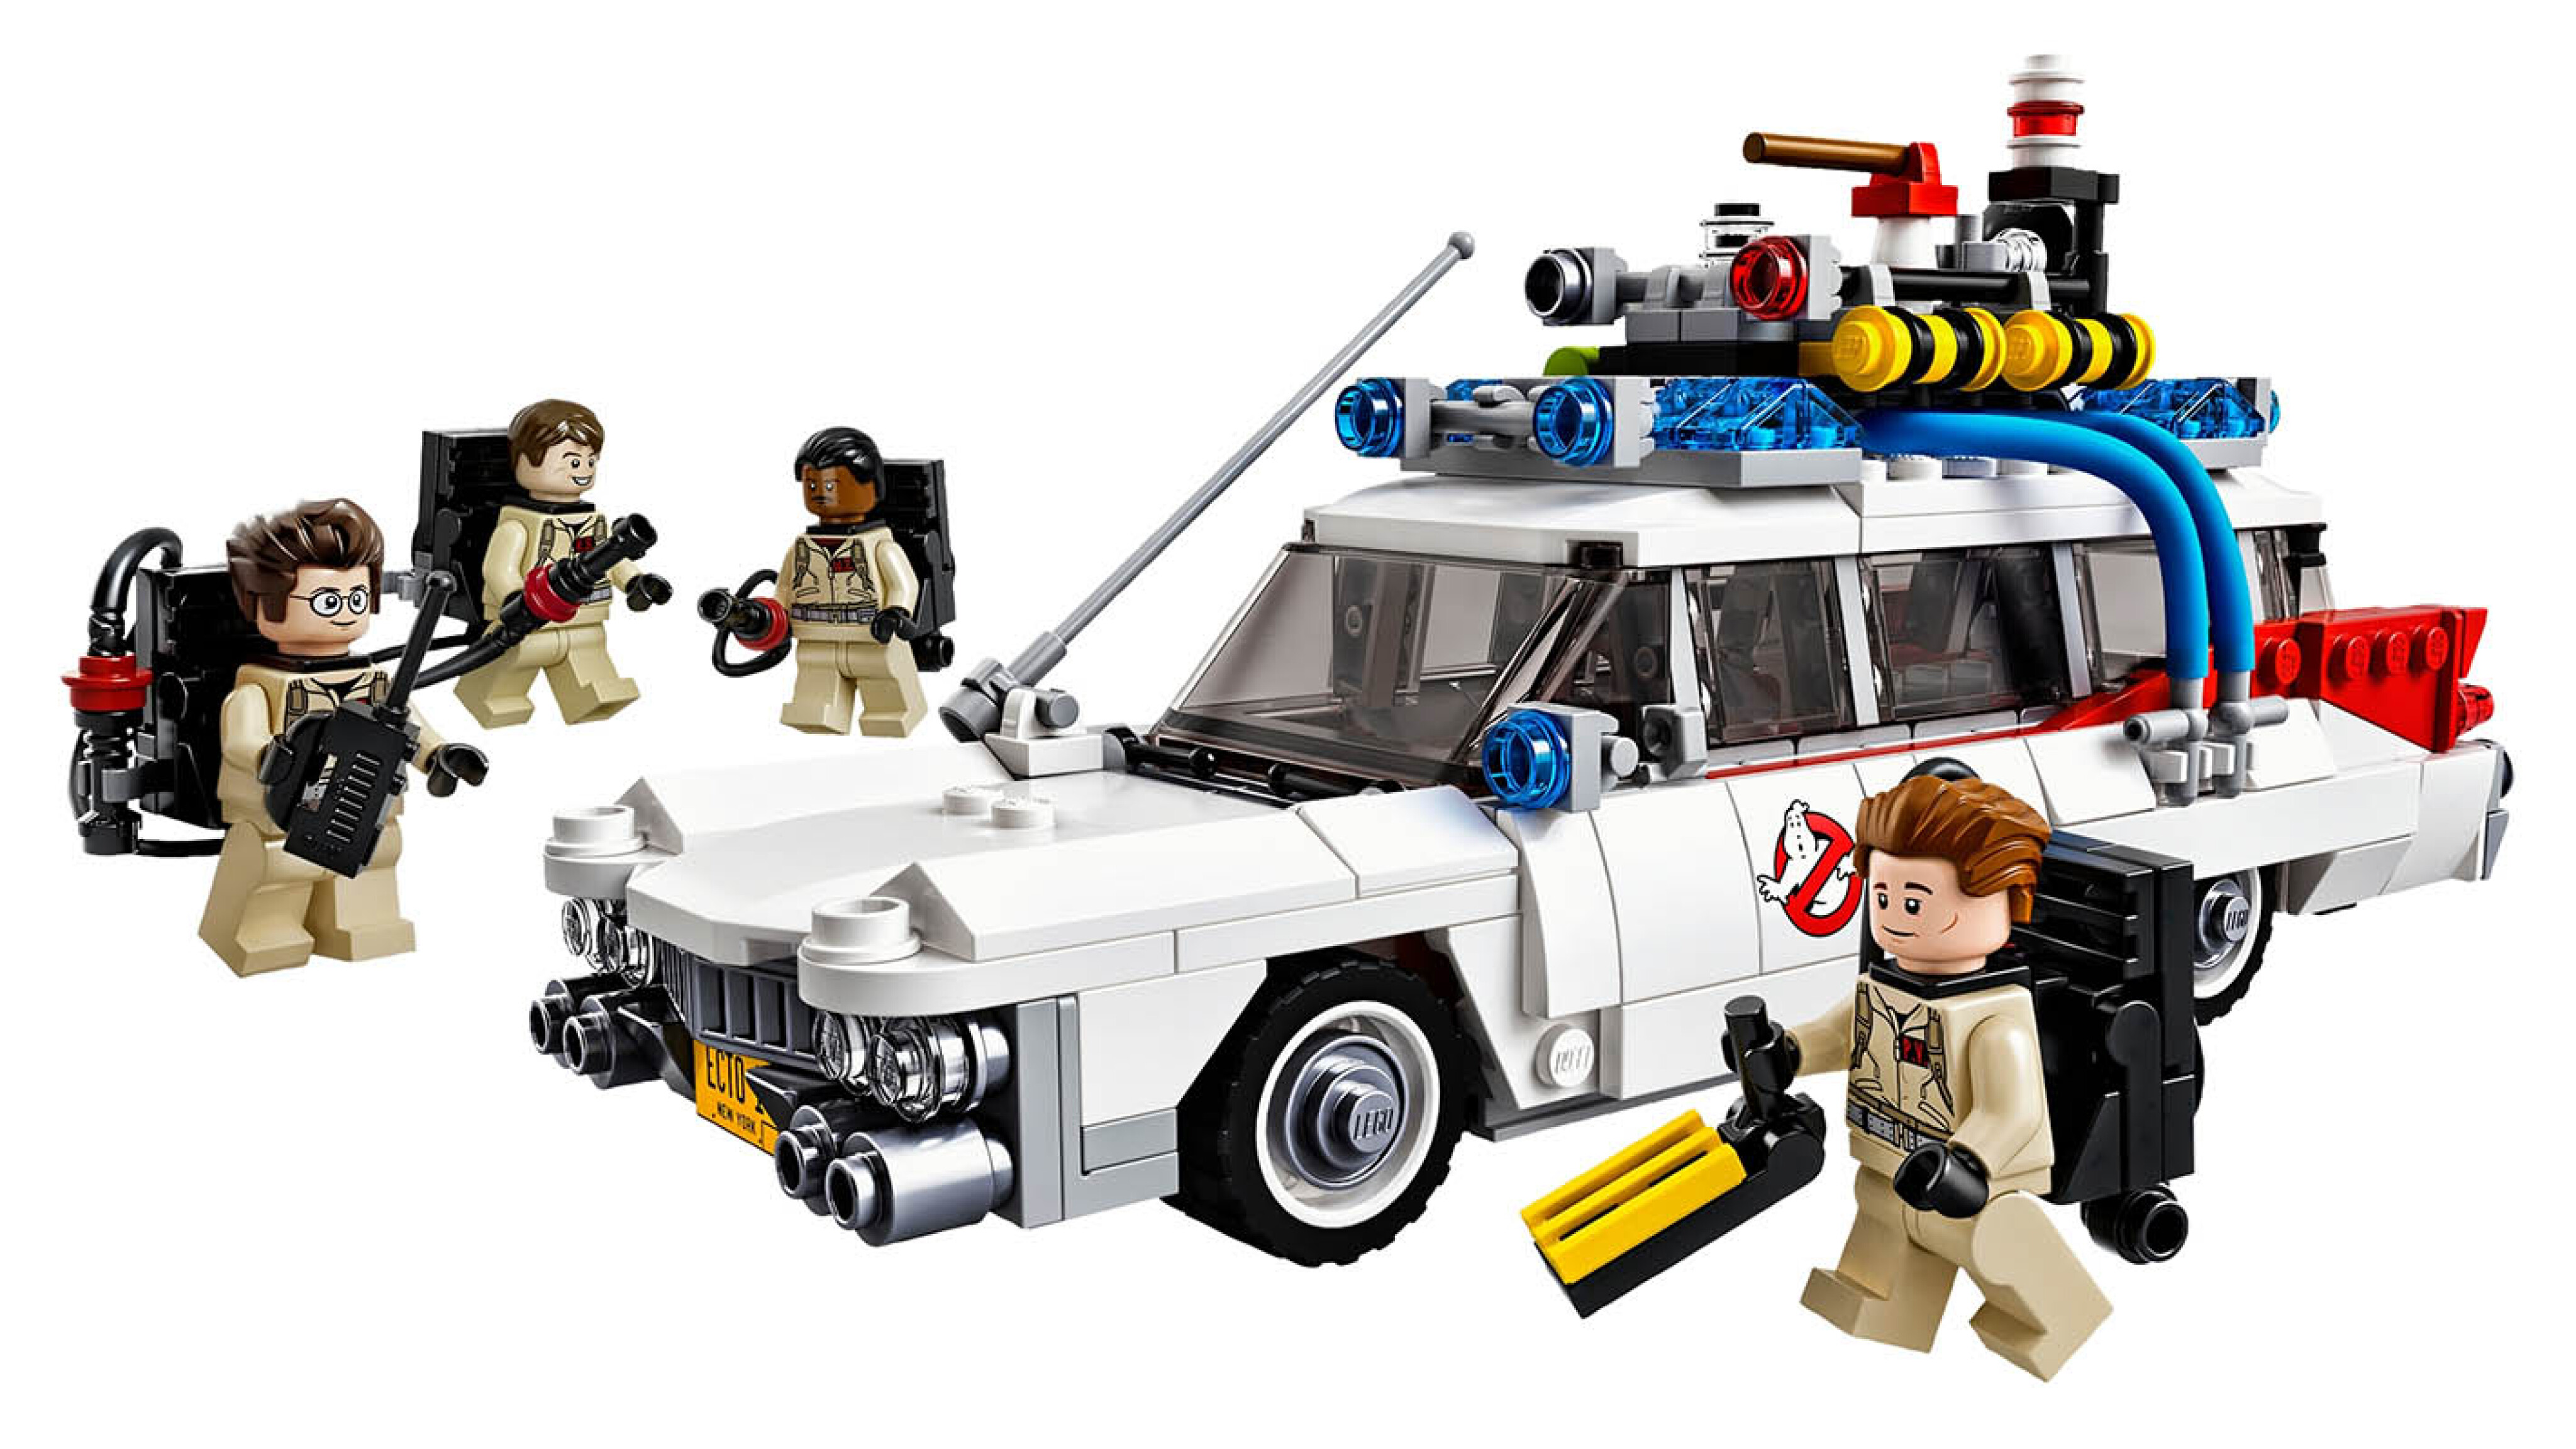 This 1,334-Piece LEGO Set Will Allow You to Build a Miniature 1962